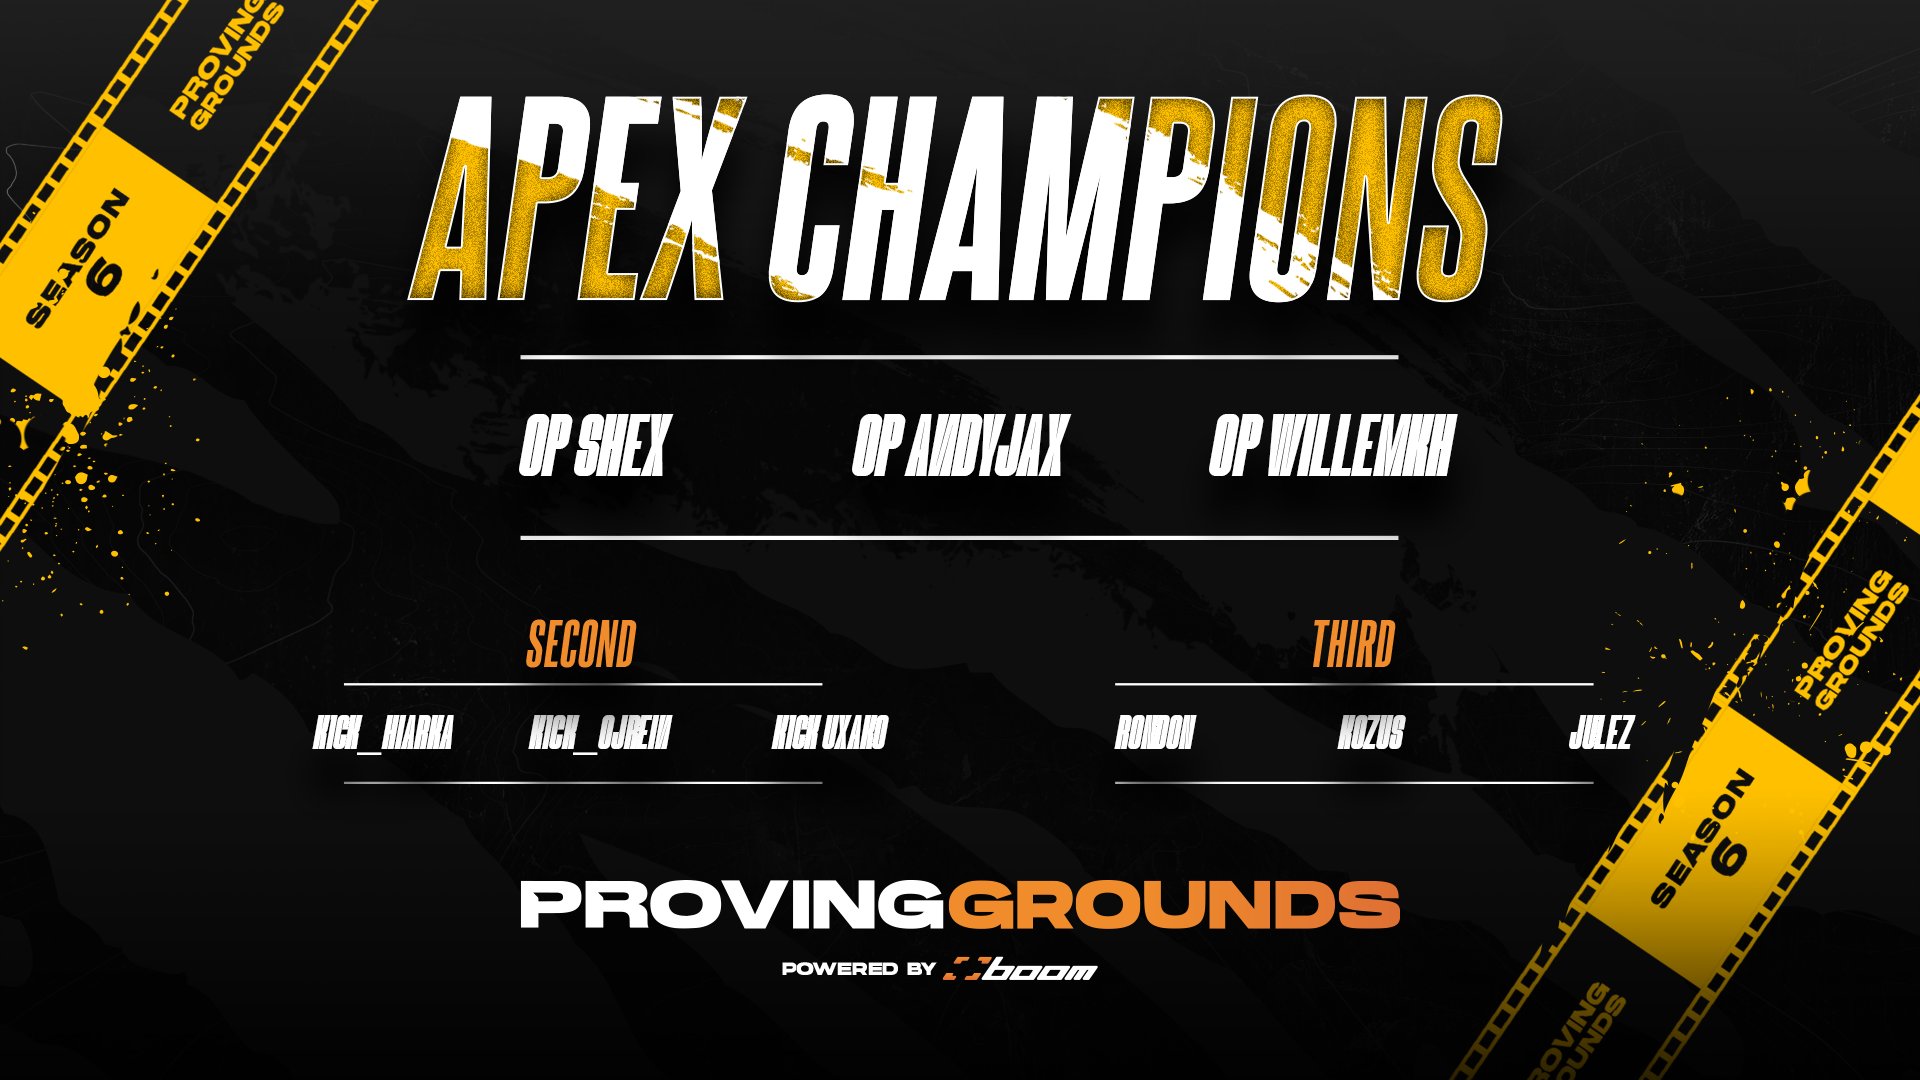 These Are Your Apex Legends Proving Grounds Champs!